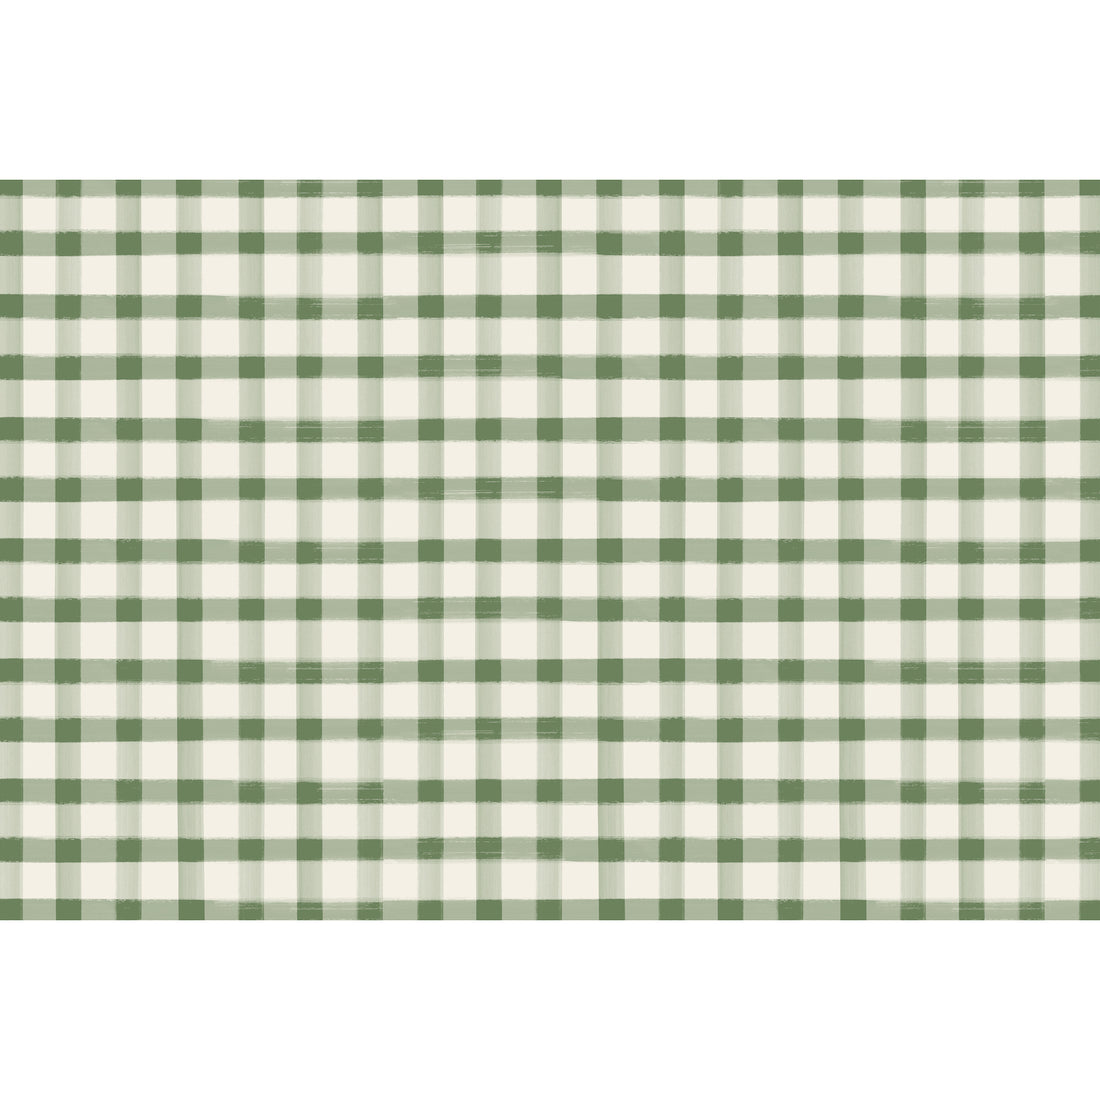 A painted grid check pattern made of pale green lines intersecting at deep green squares, on a white background.